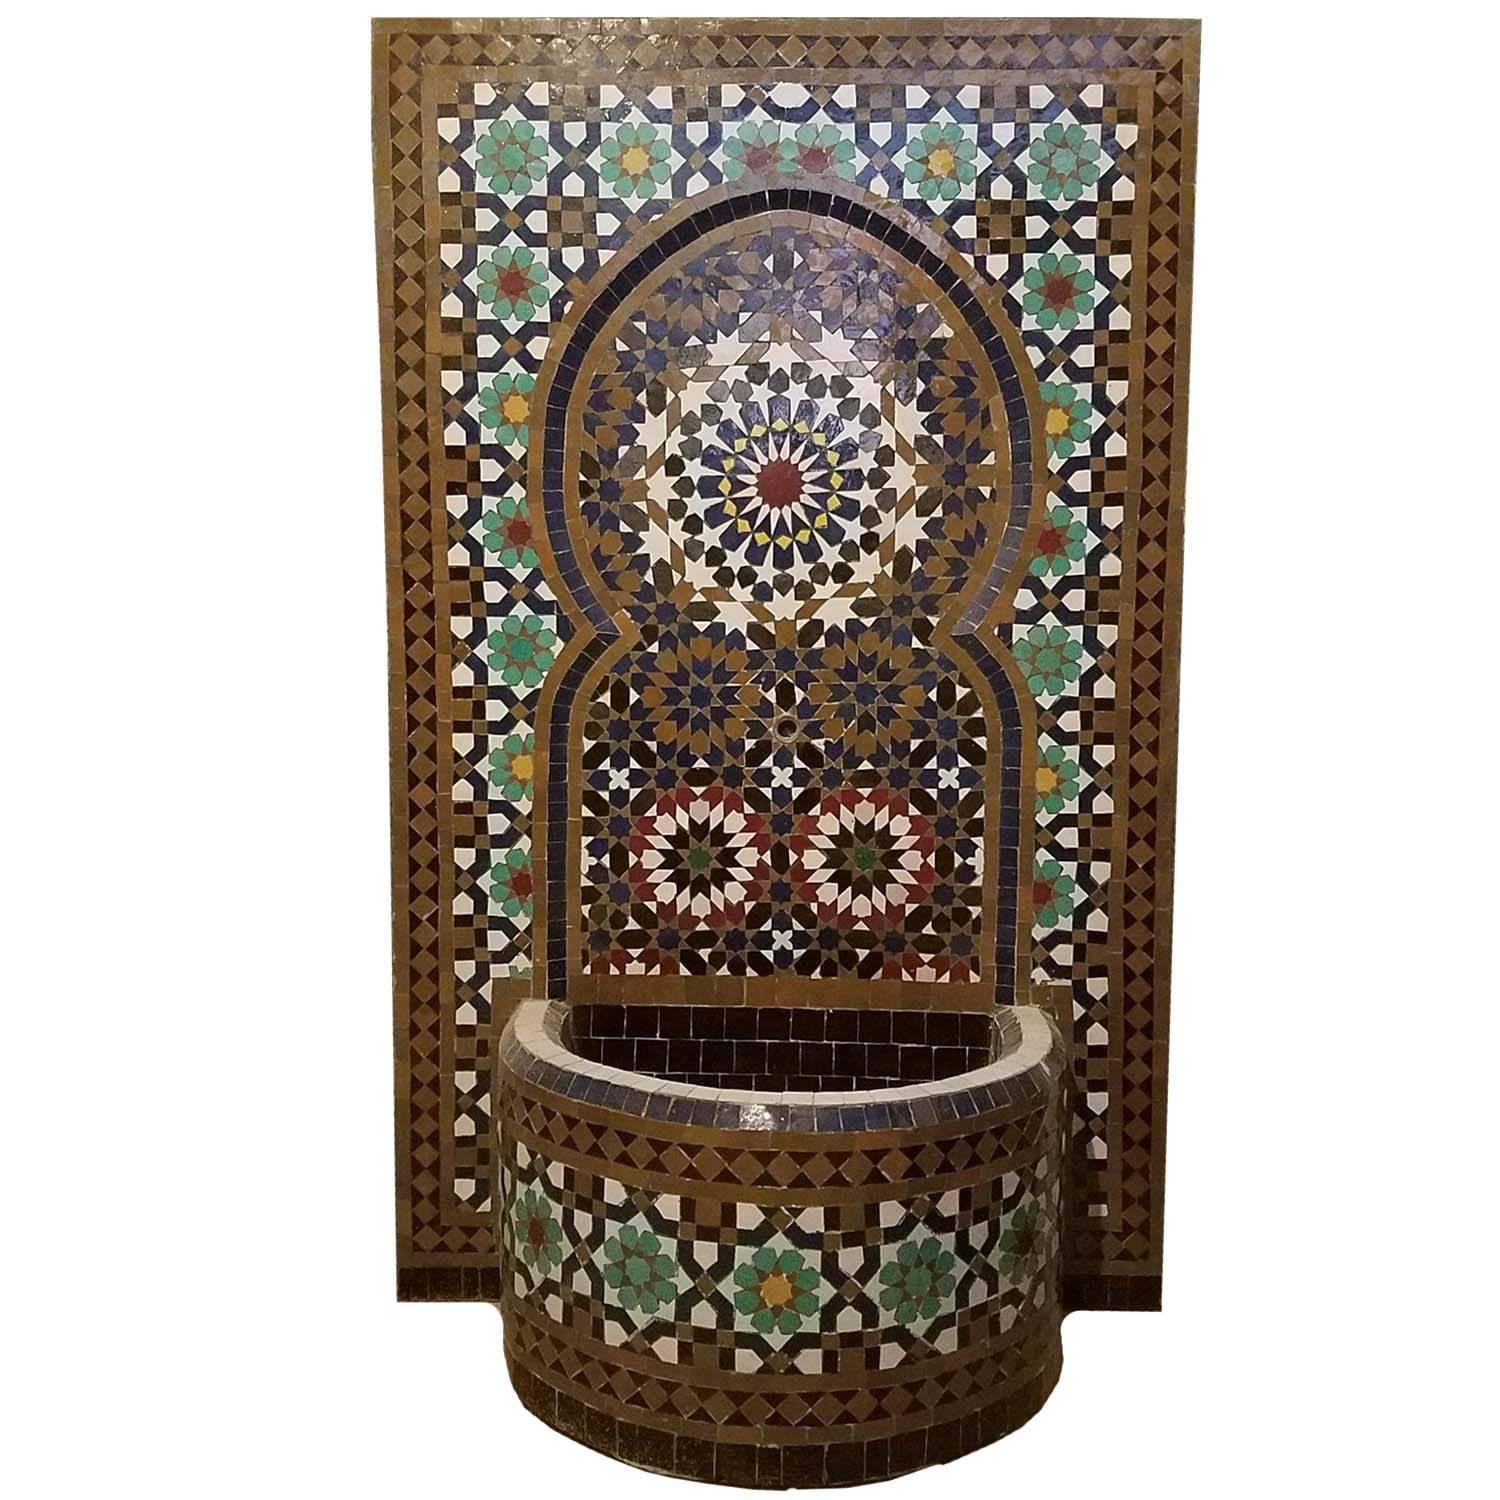 Moorish Tangiers Style Moroccan Fountain -Mosaic Tiles For Sale